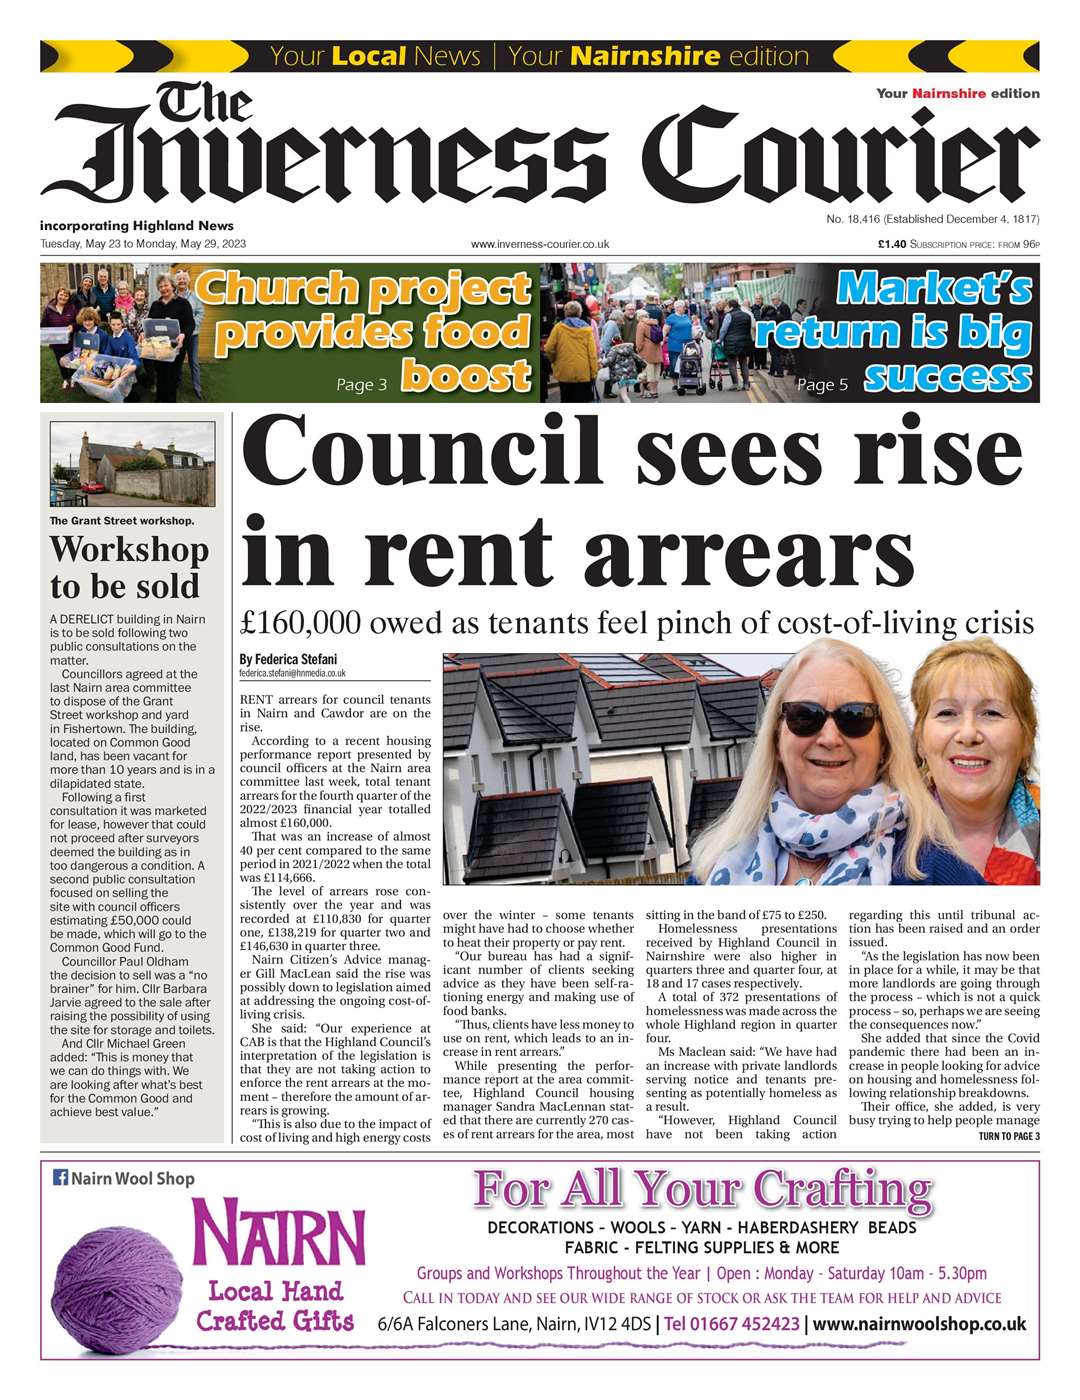 The Inverness Courier (Nairnshire edition), May 23, front page.